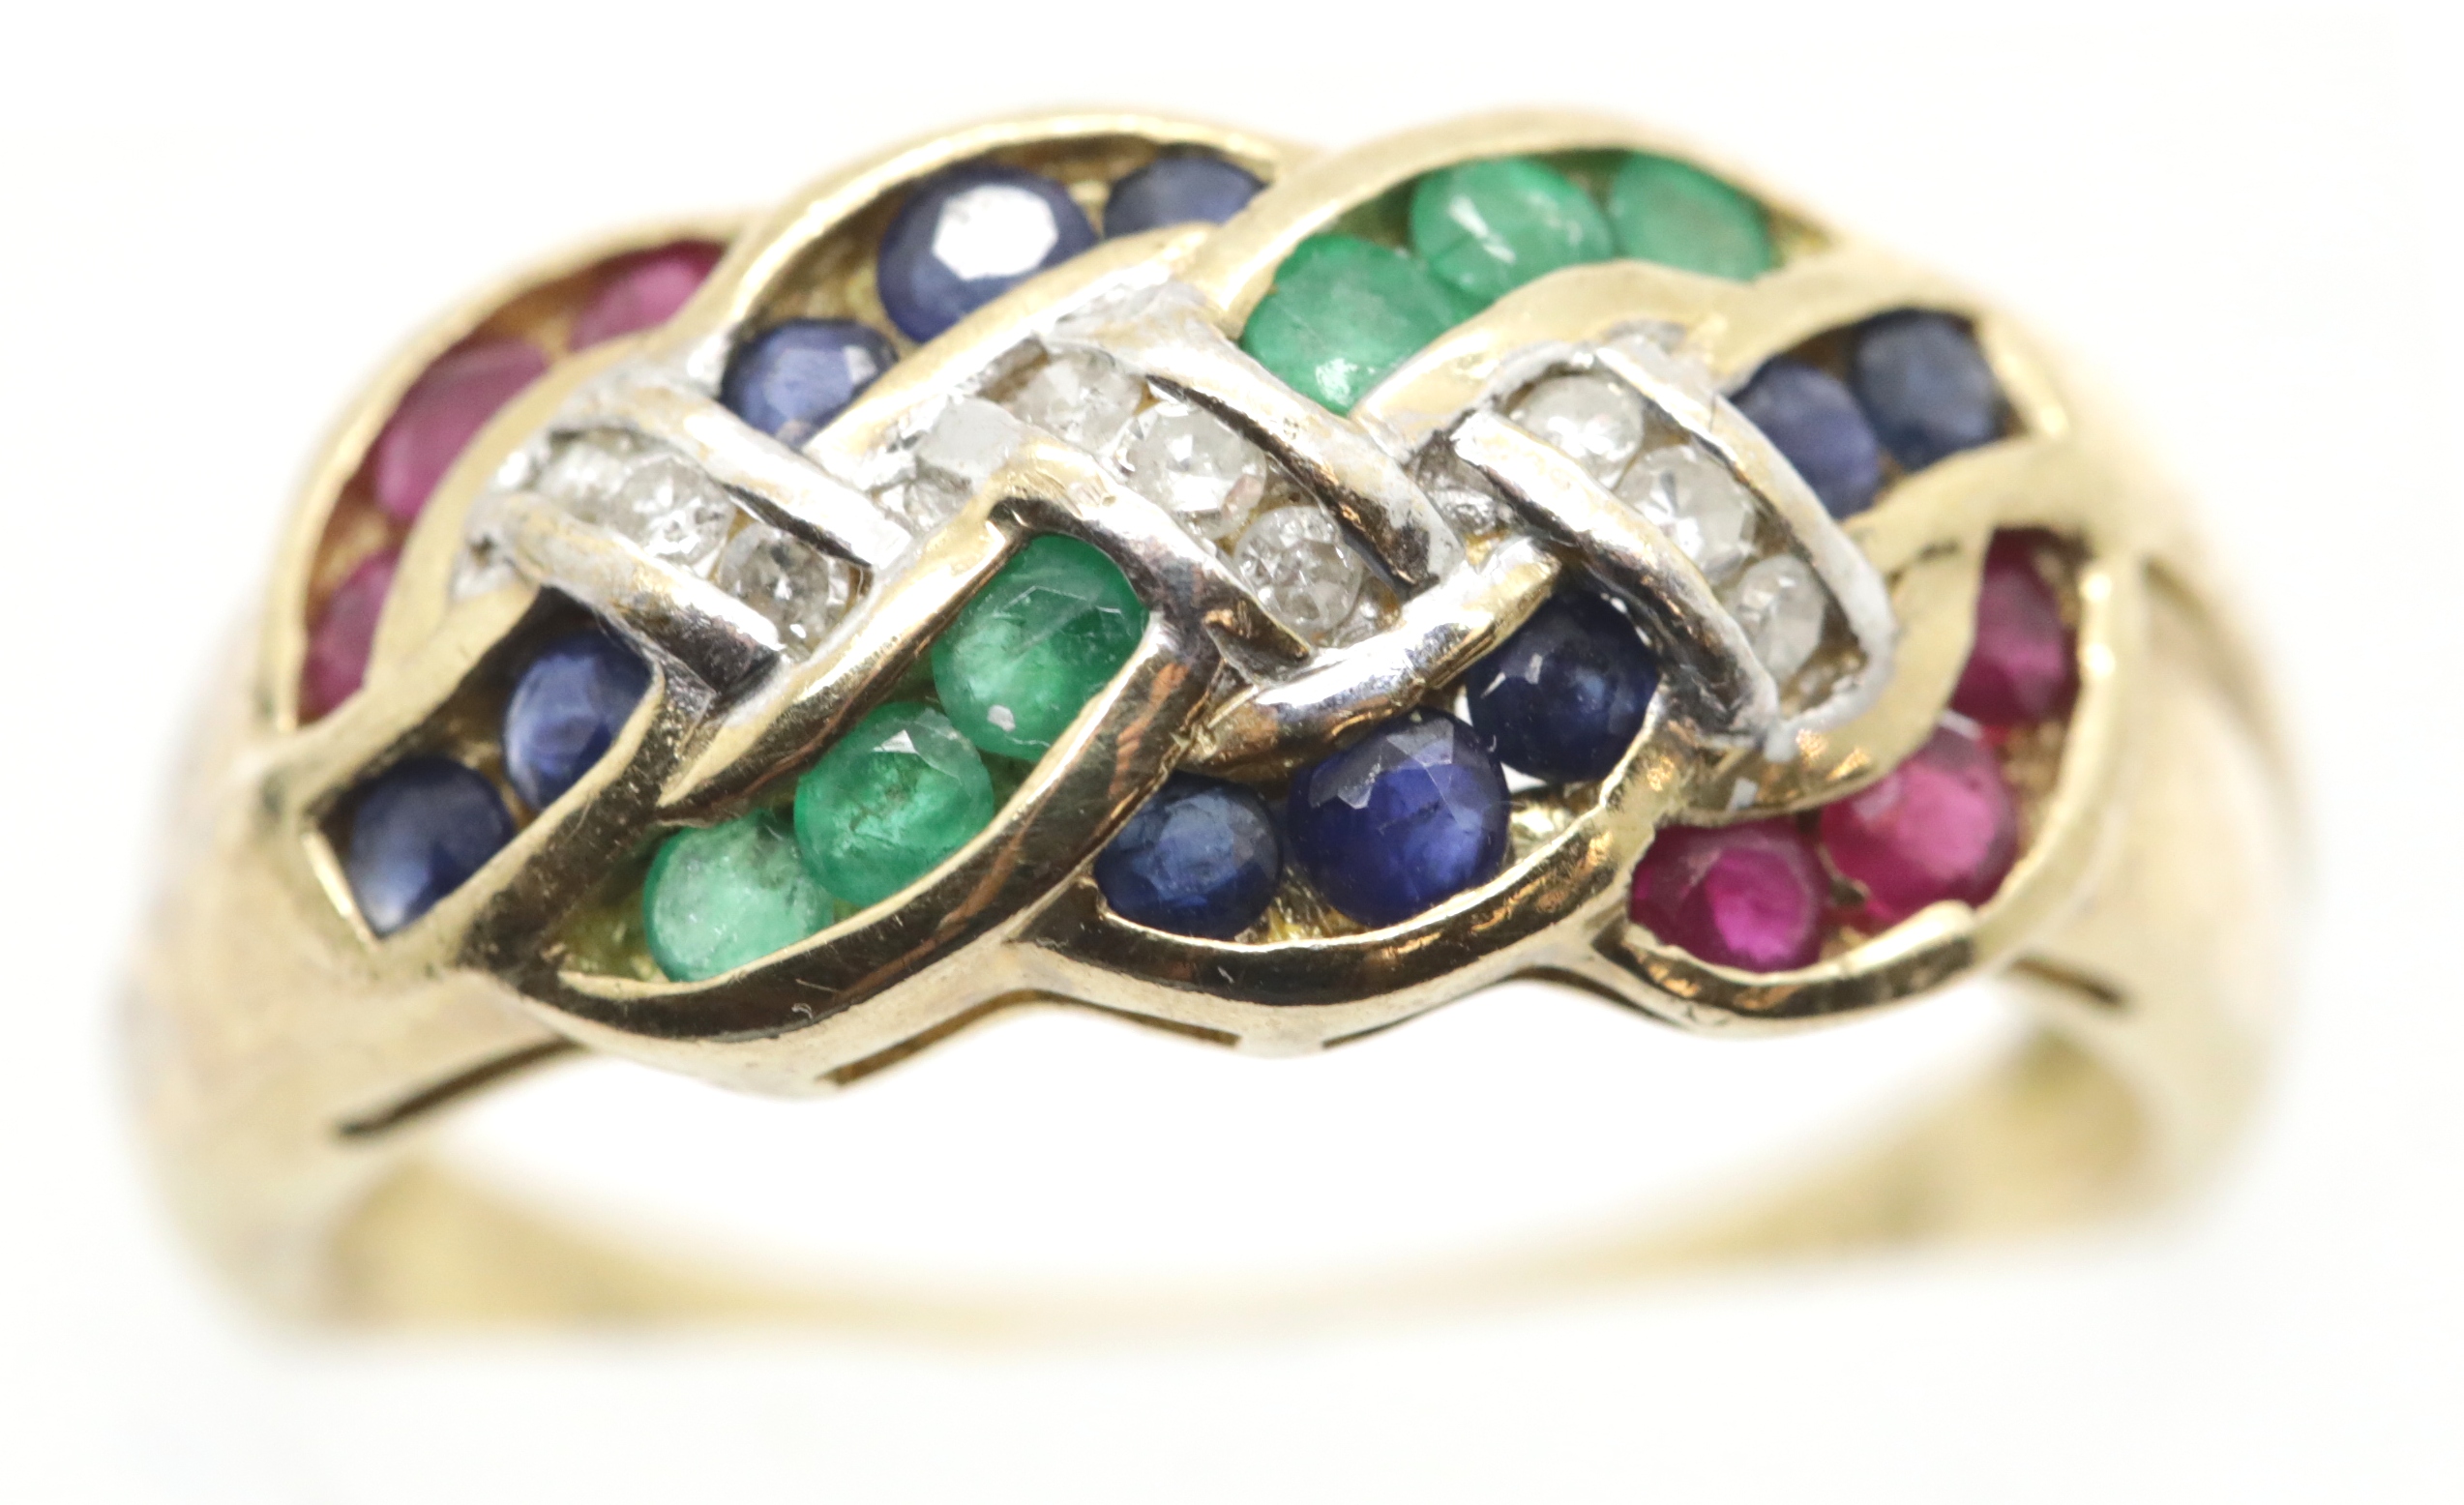 9ct gold, diamond, sapphire, ruby and emerald ring, size R/S, 3.9g. P&P Group 1 (£14+VAT for the